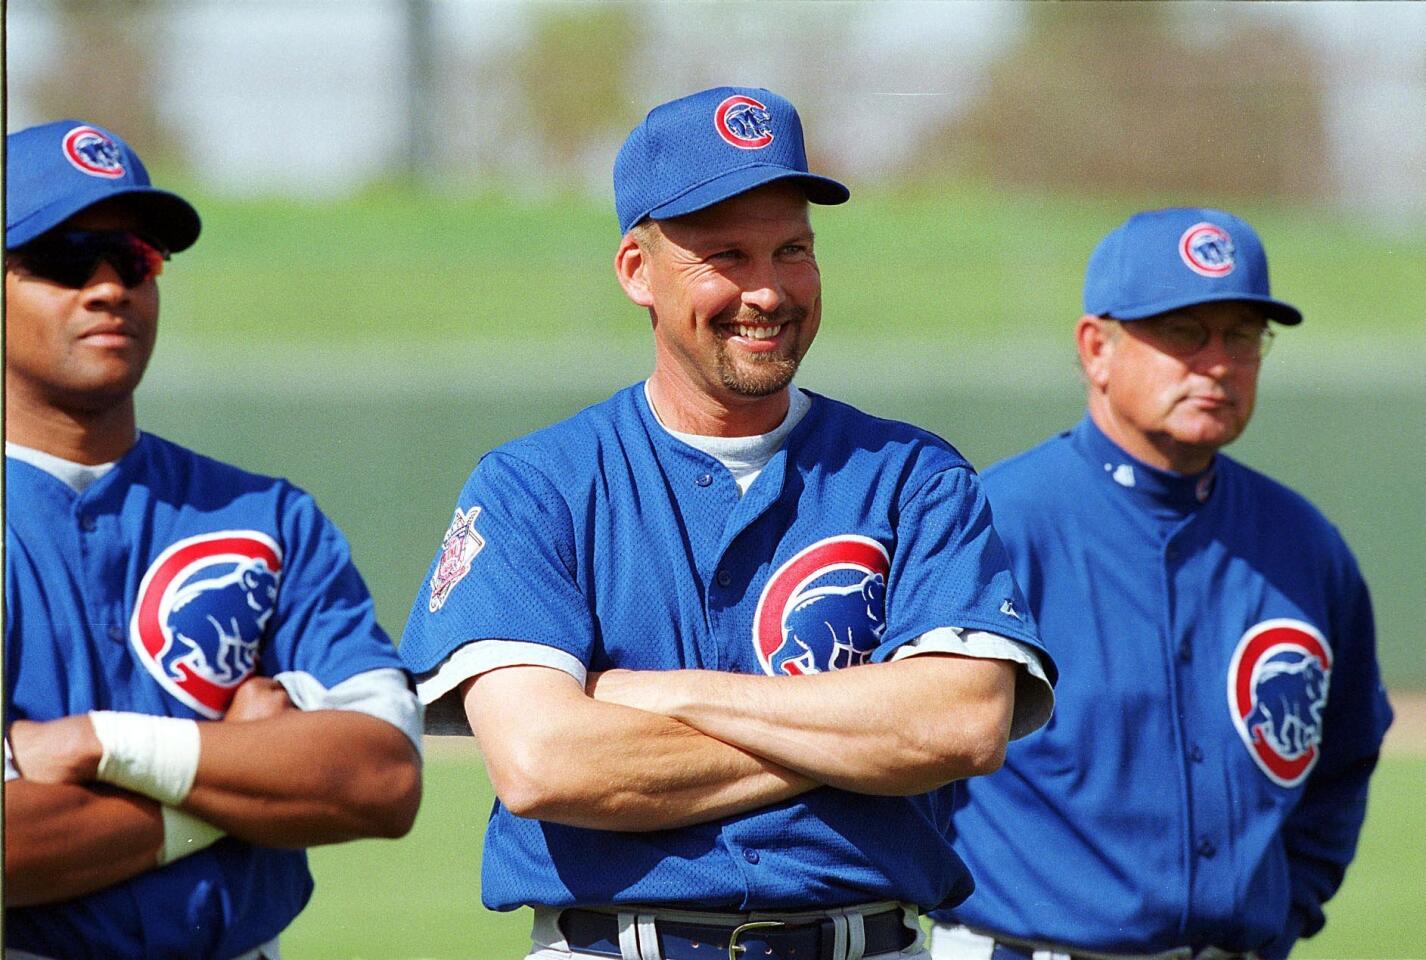 Mark Grace (center) smiles after being introduced at Cubs spring training in 2000.